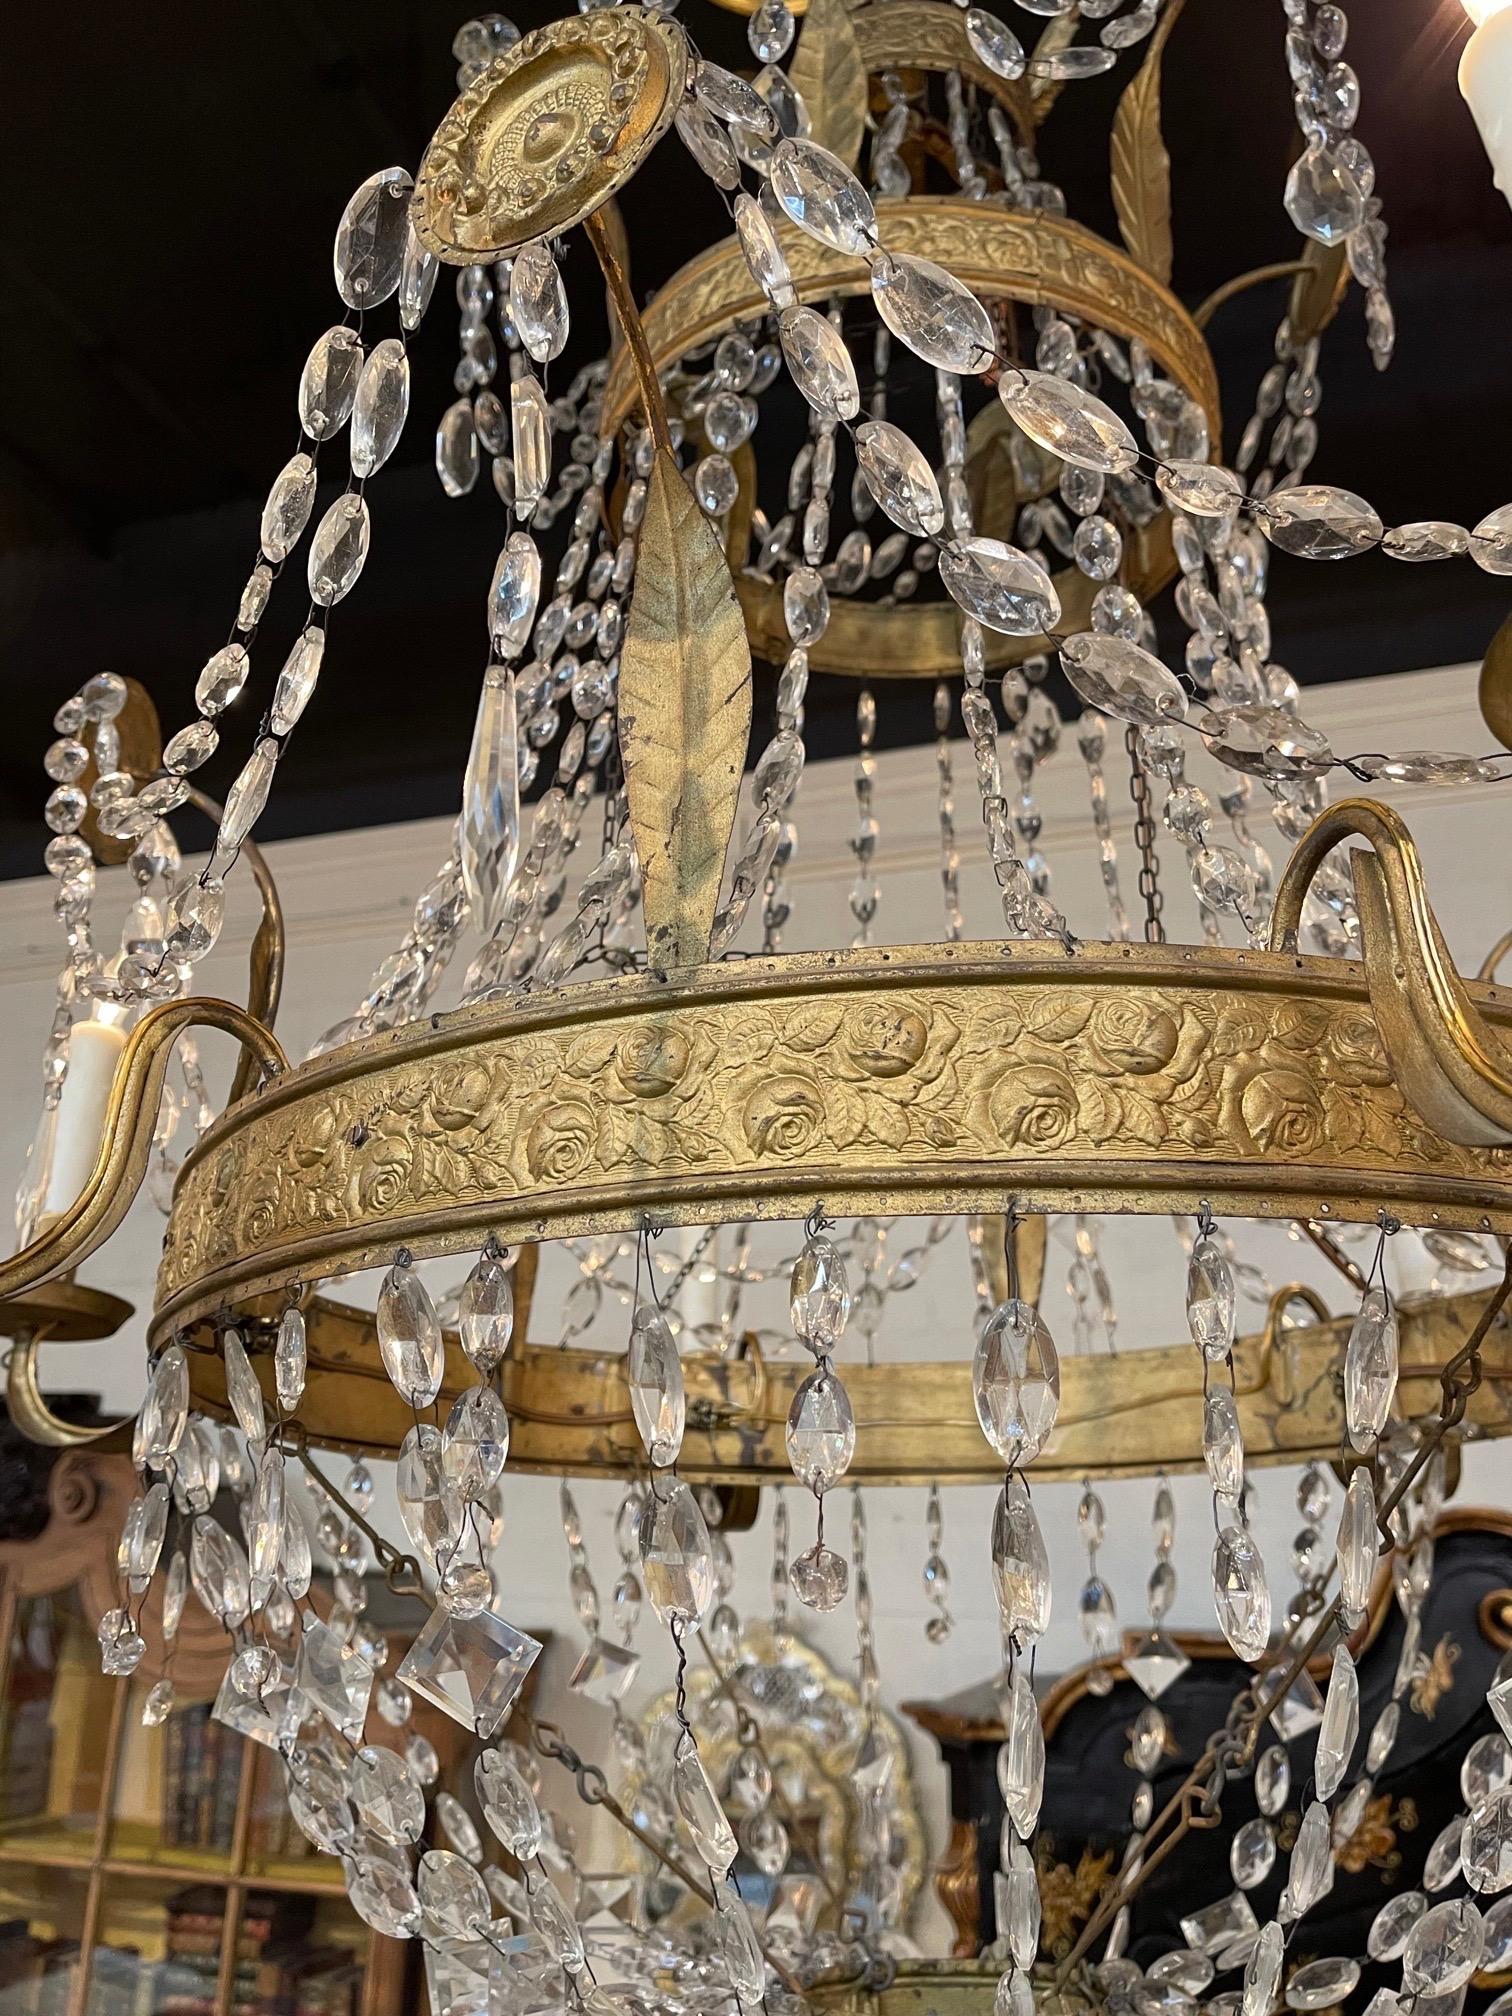 Exceptional 18th century gilt metal and crystal chandelier from Tuscany. Featuring cascading crystals and lovely gilt metal details including decorative medallions. Stunning!!